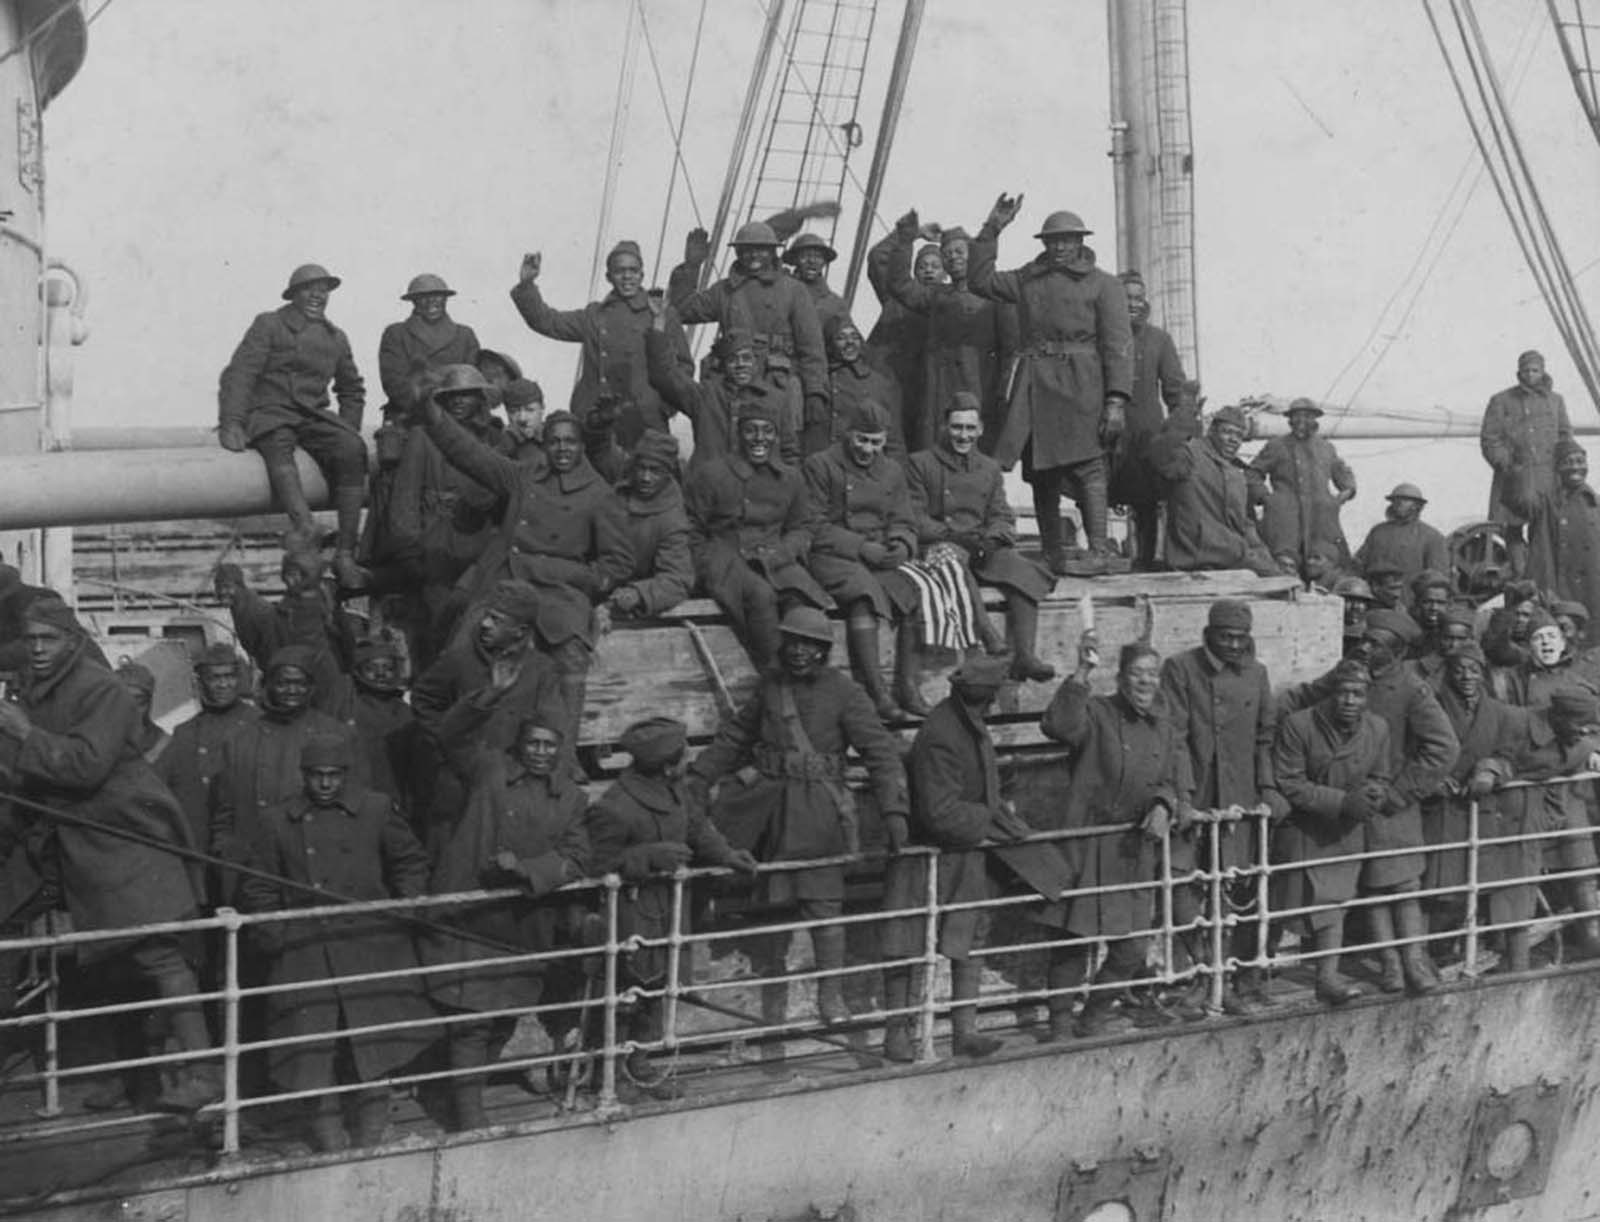 New York’s famous 369th regiment arrives home from France.